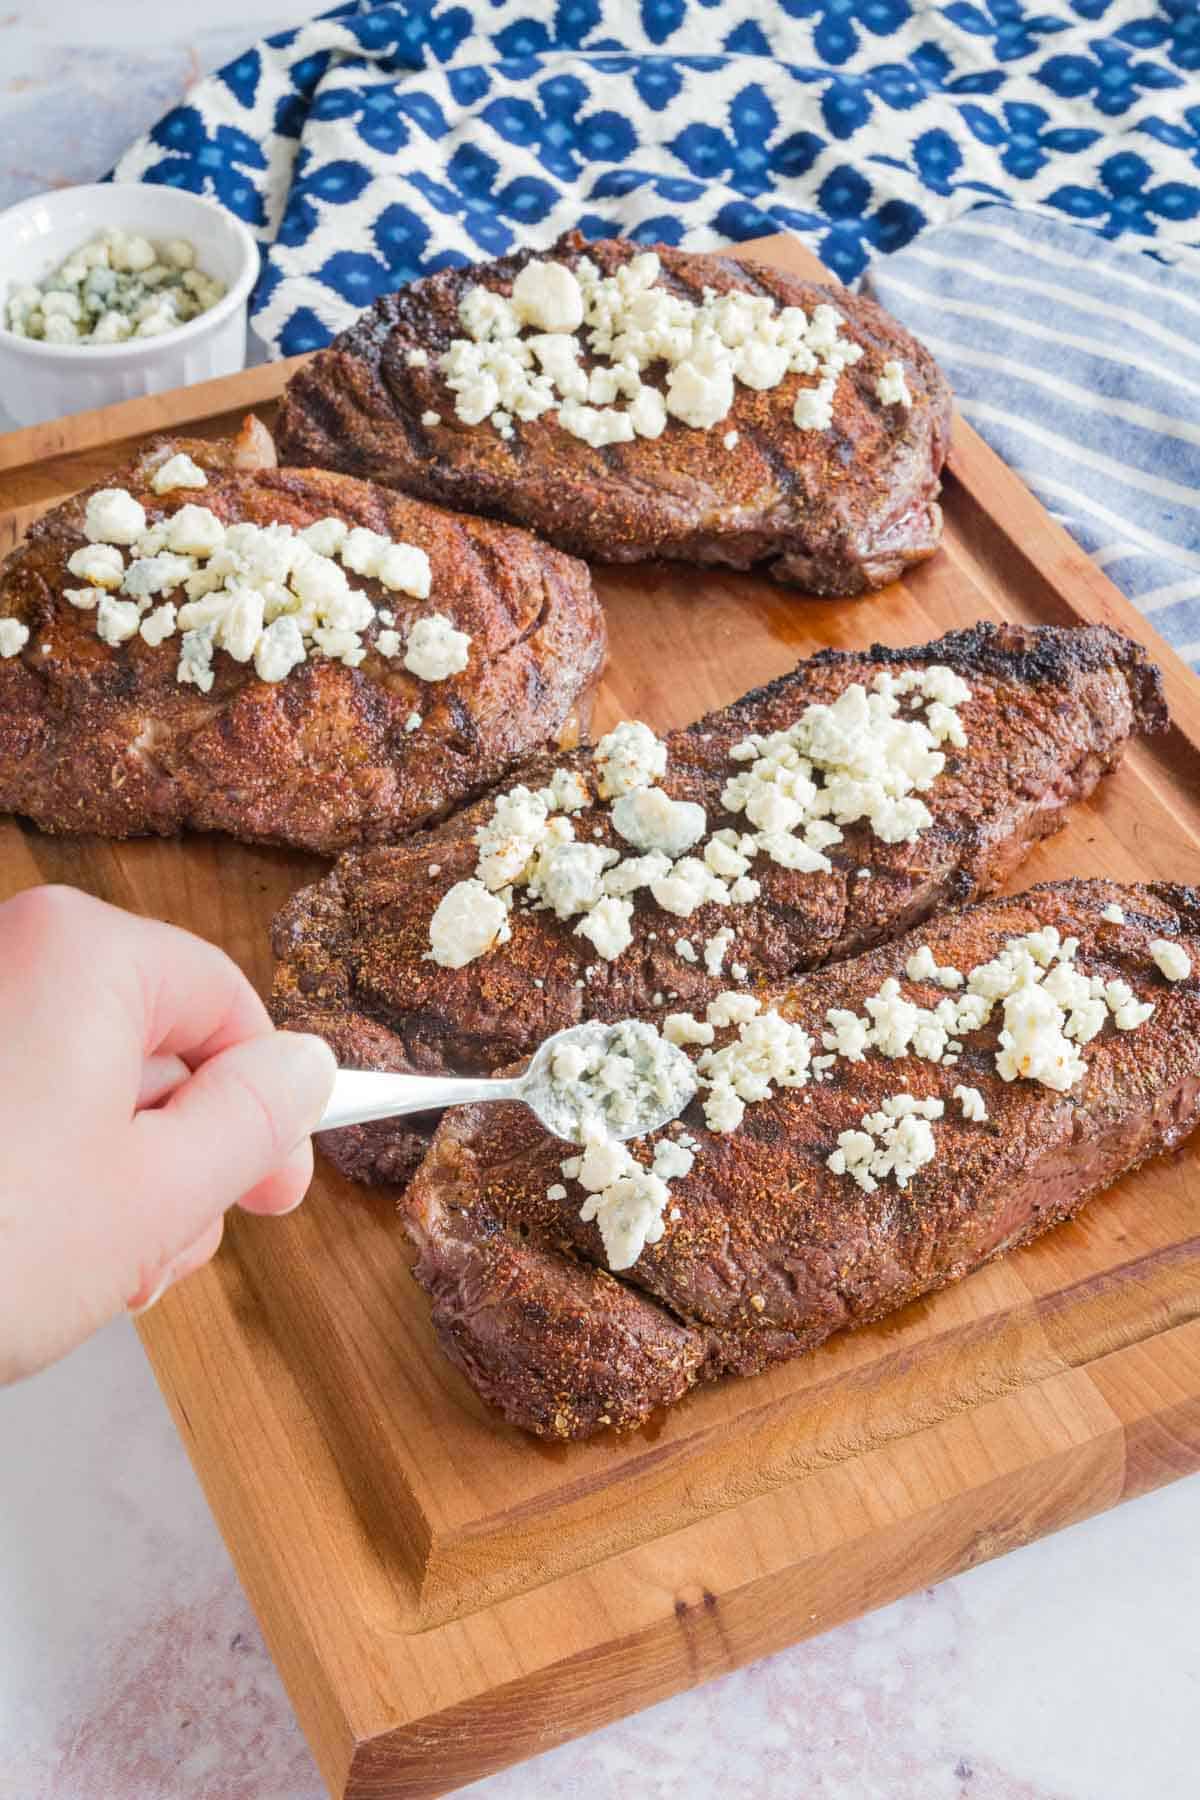 Crumbled Bleu Cheese Being Placed on Top of Blackened NY Strip Steaks